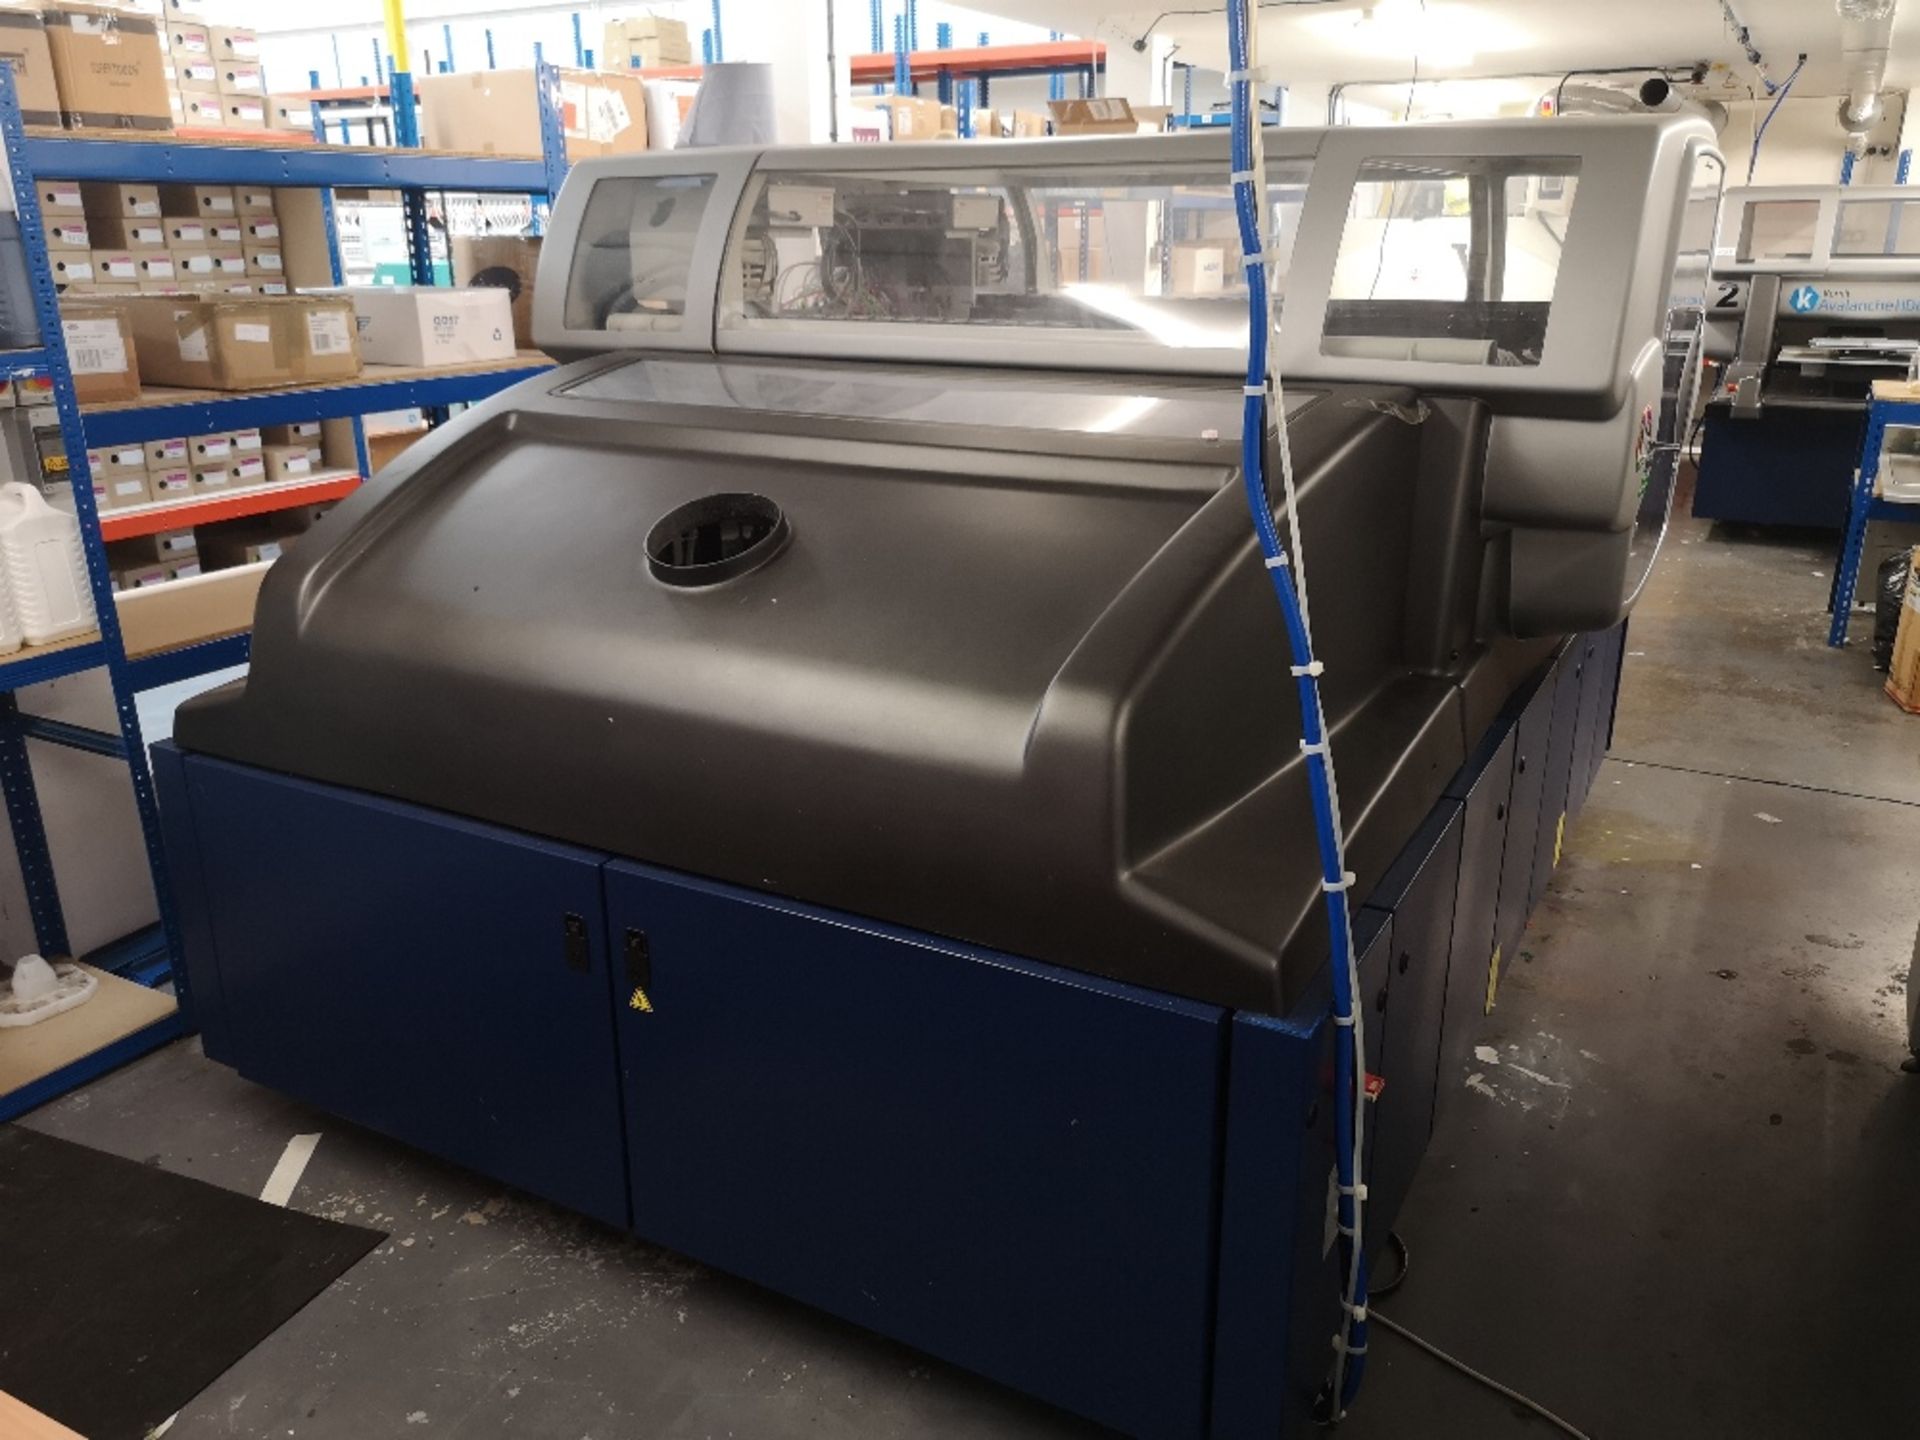 Kornit Avalanche HD6 Series Direct to Garment Printer (2018) - Image 6 of 9